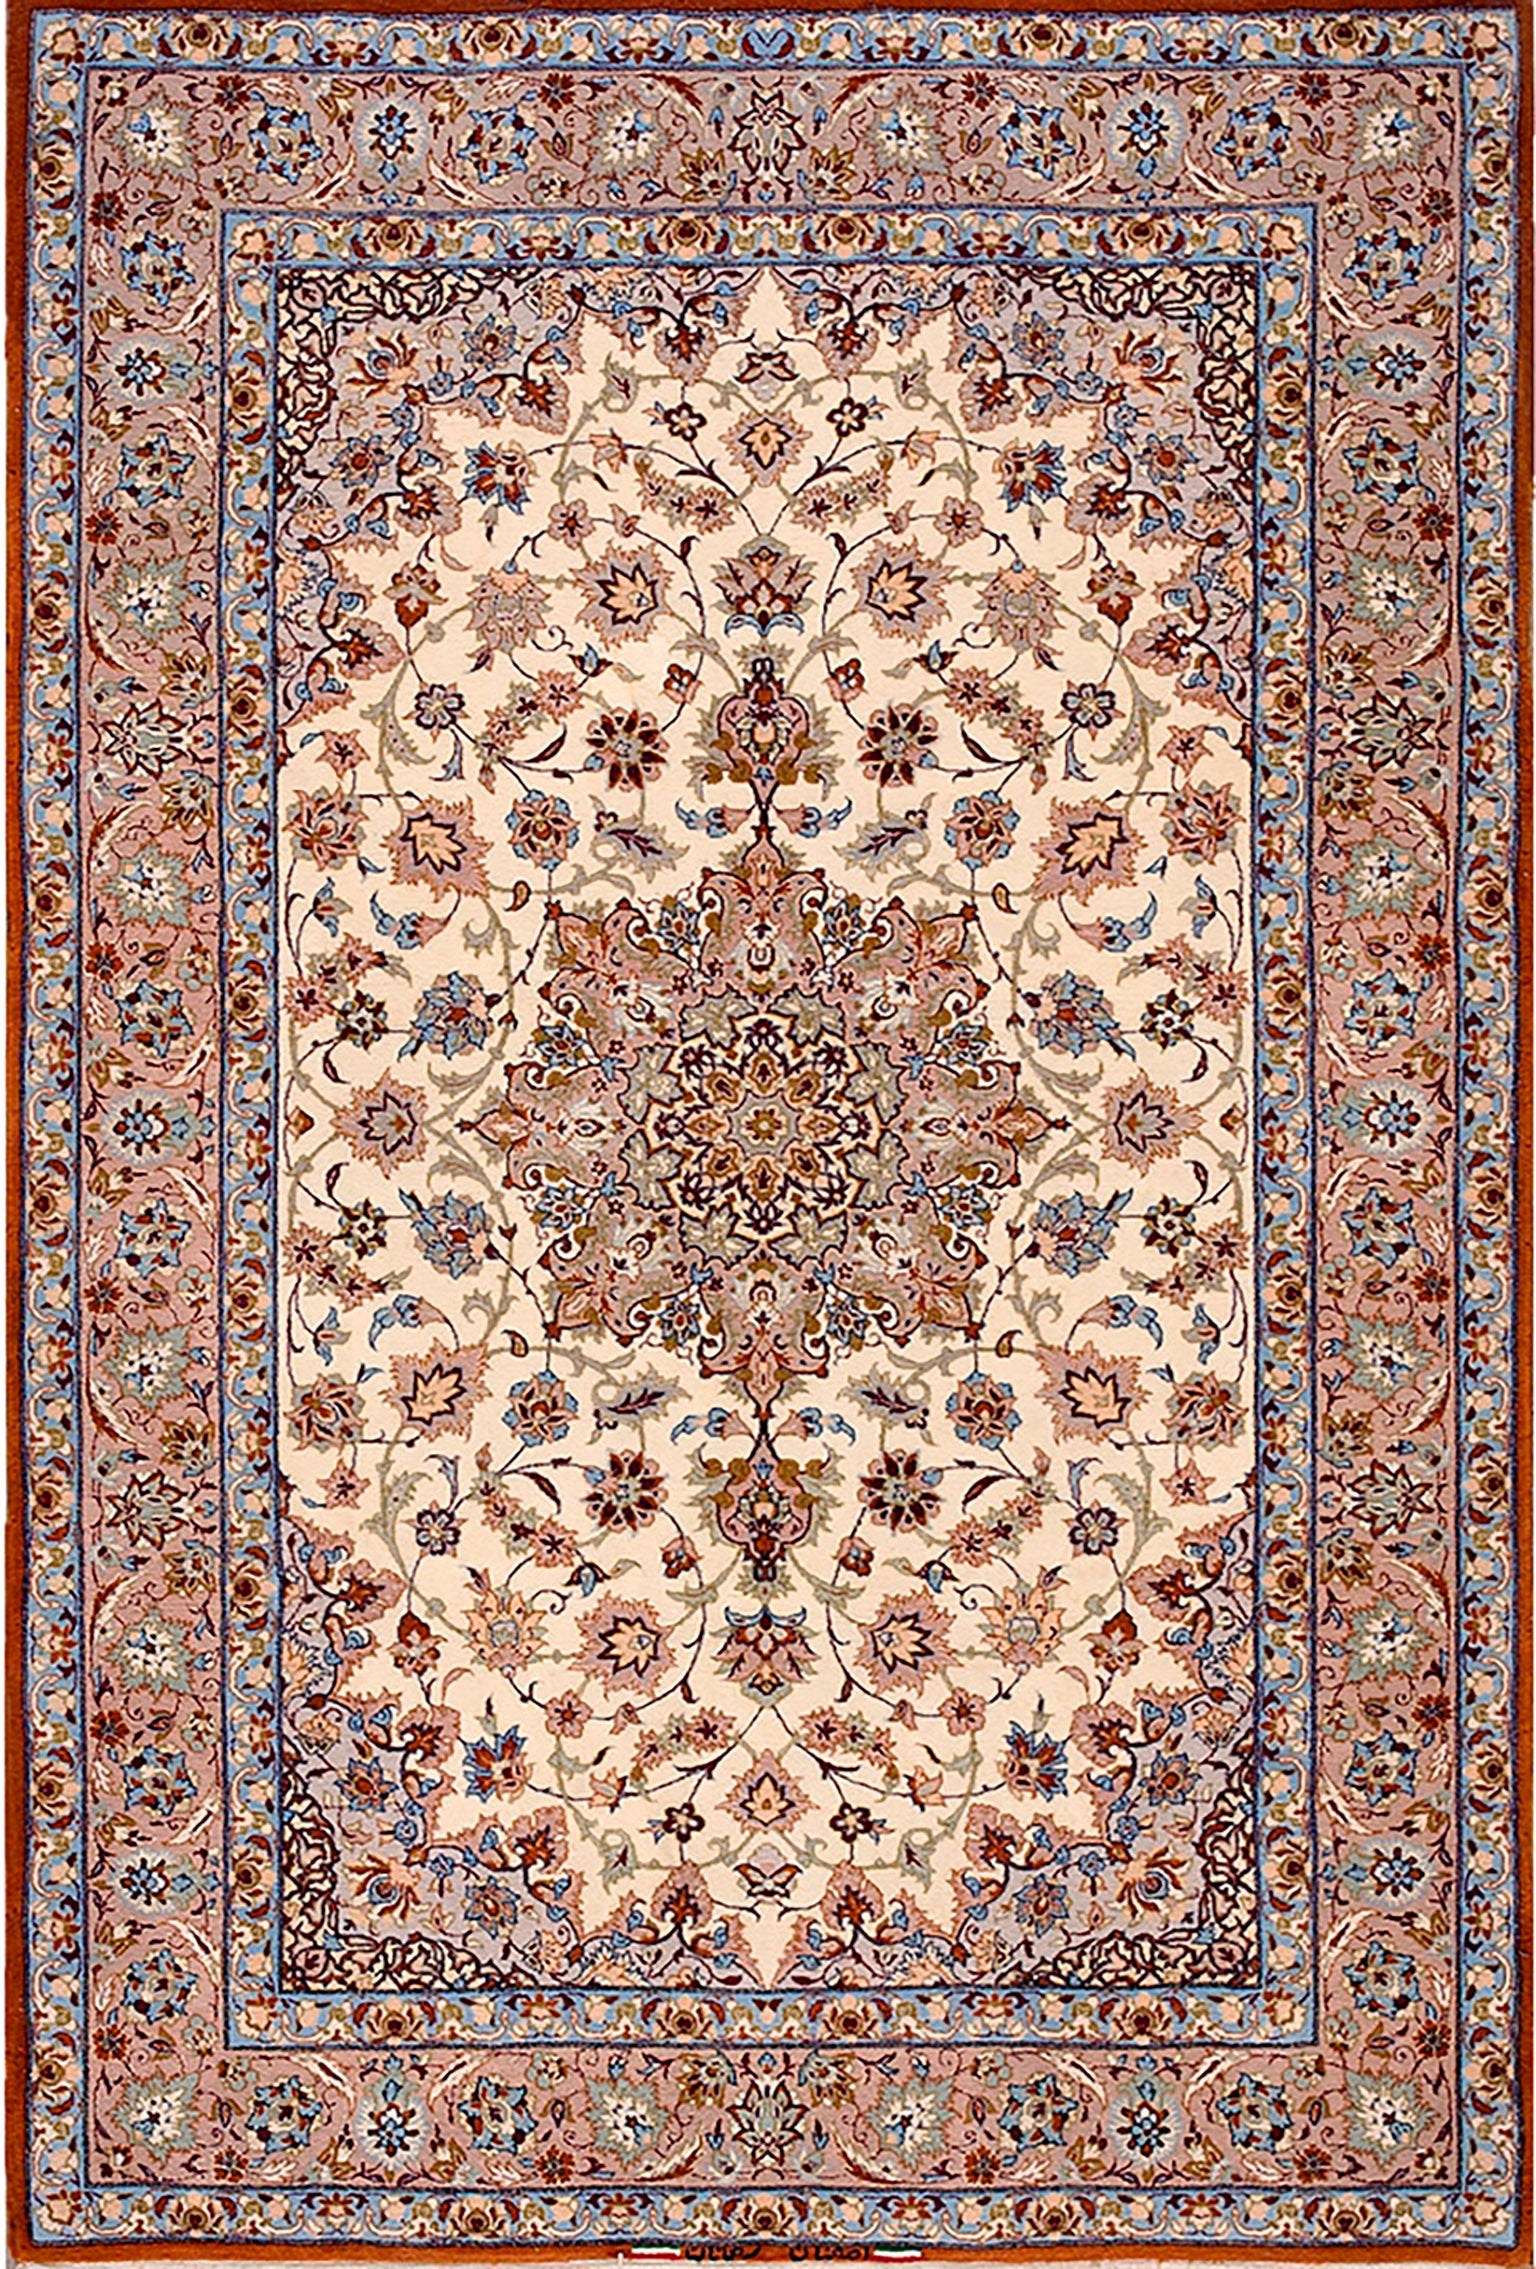 Mid 20th Century Isfahan Carpet with Silk Highlights ( 3'8" x 5'5" - 112 x 165 ) For Sale